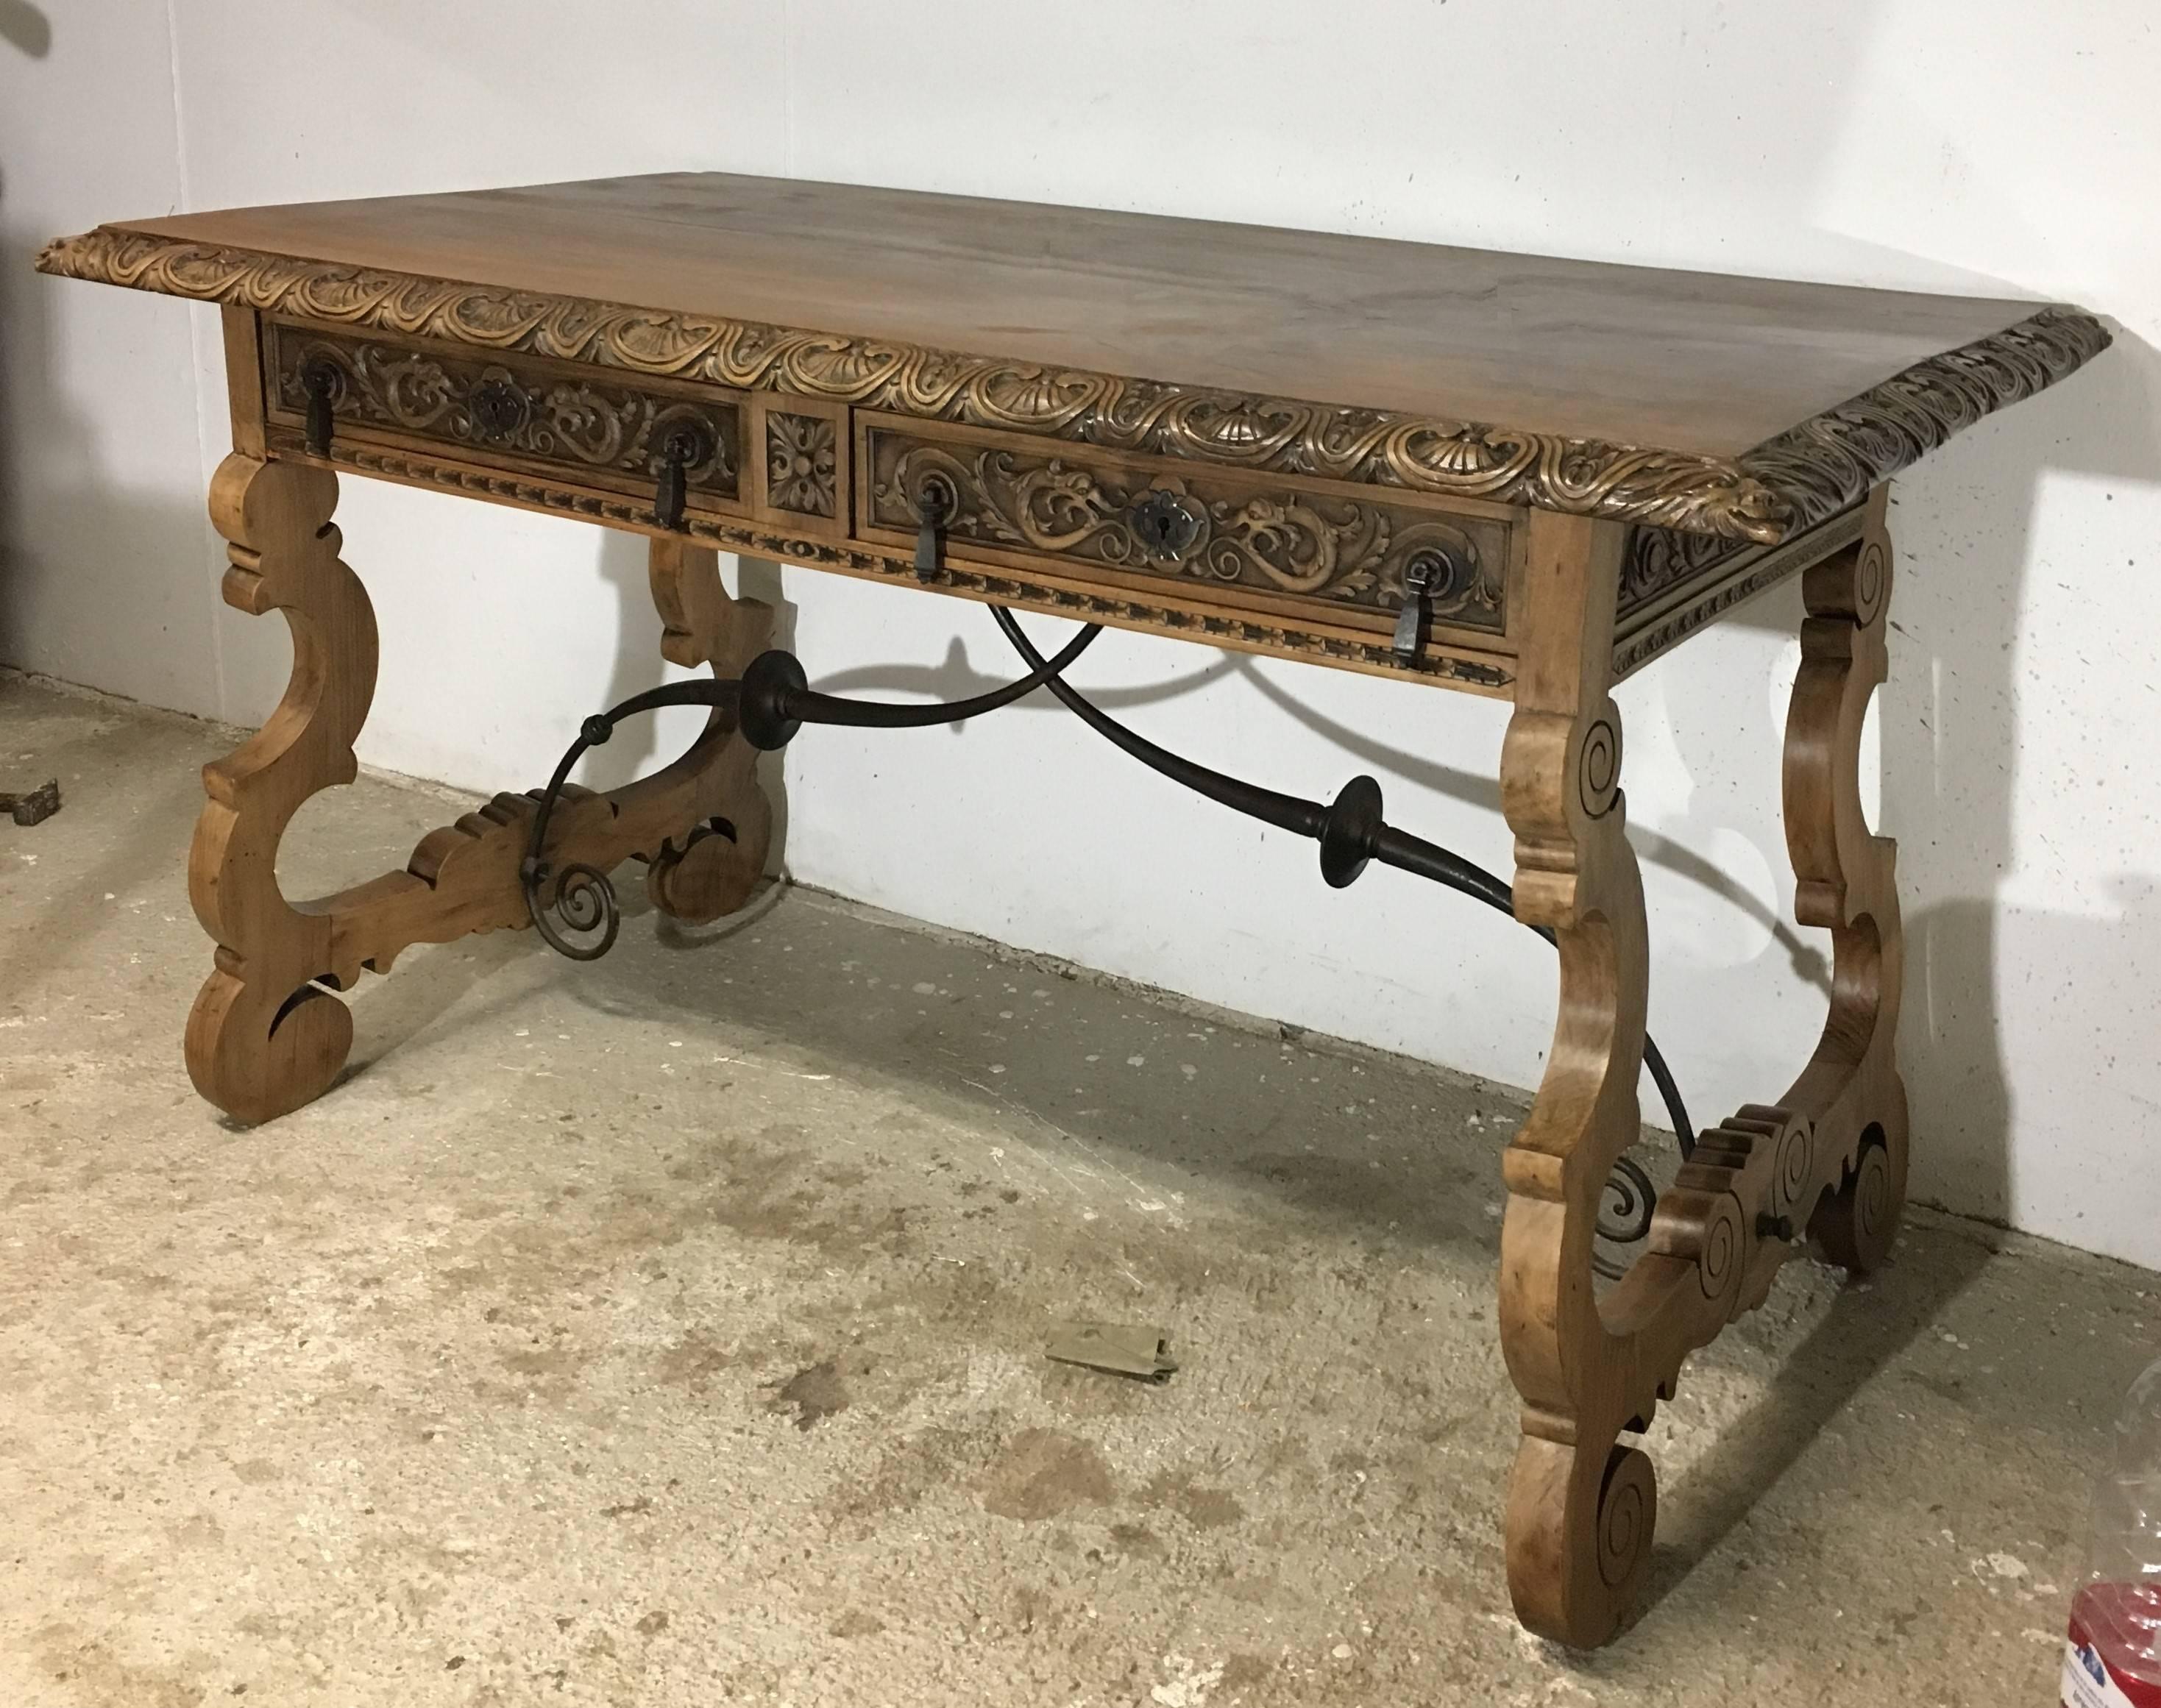 Hand-Carved 19th Century Walnut and Wrought Iron Desk with Two Drawers and Lyre Legs